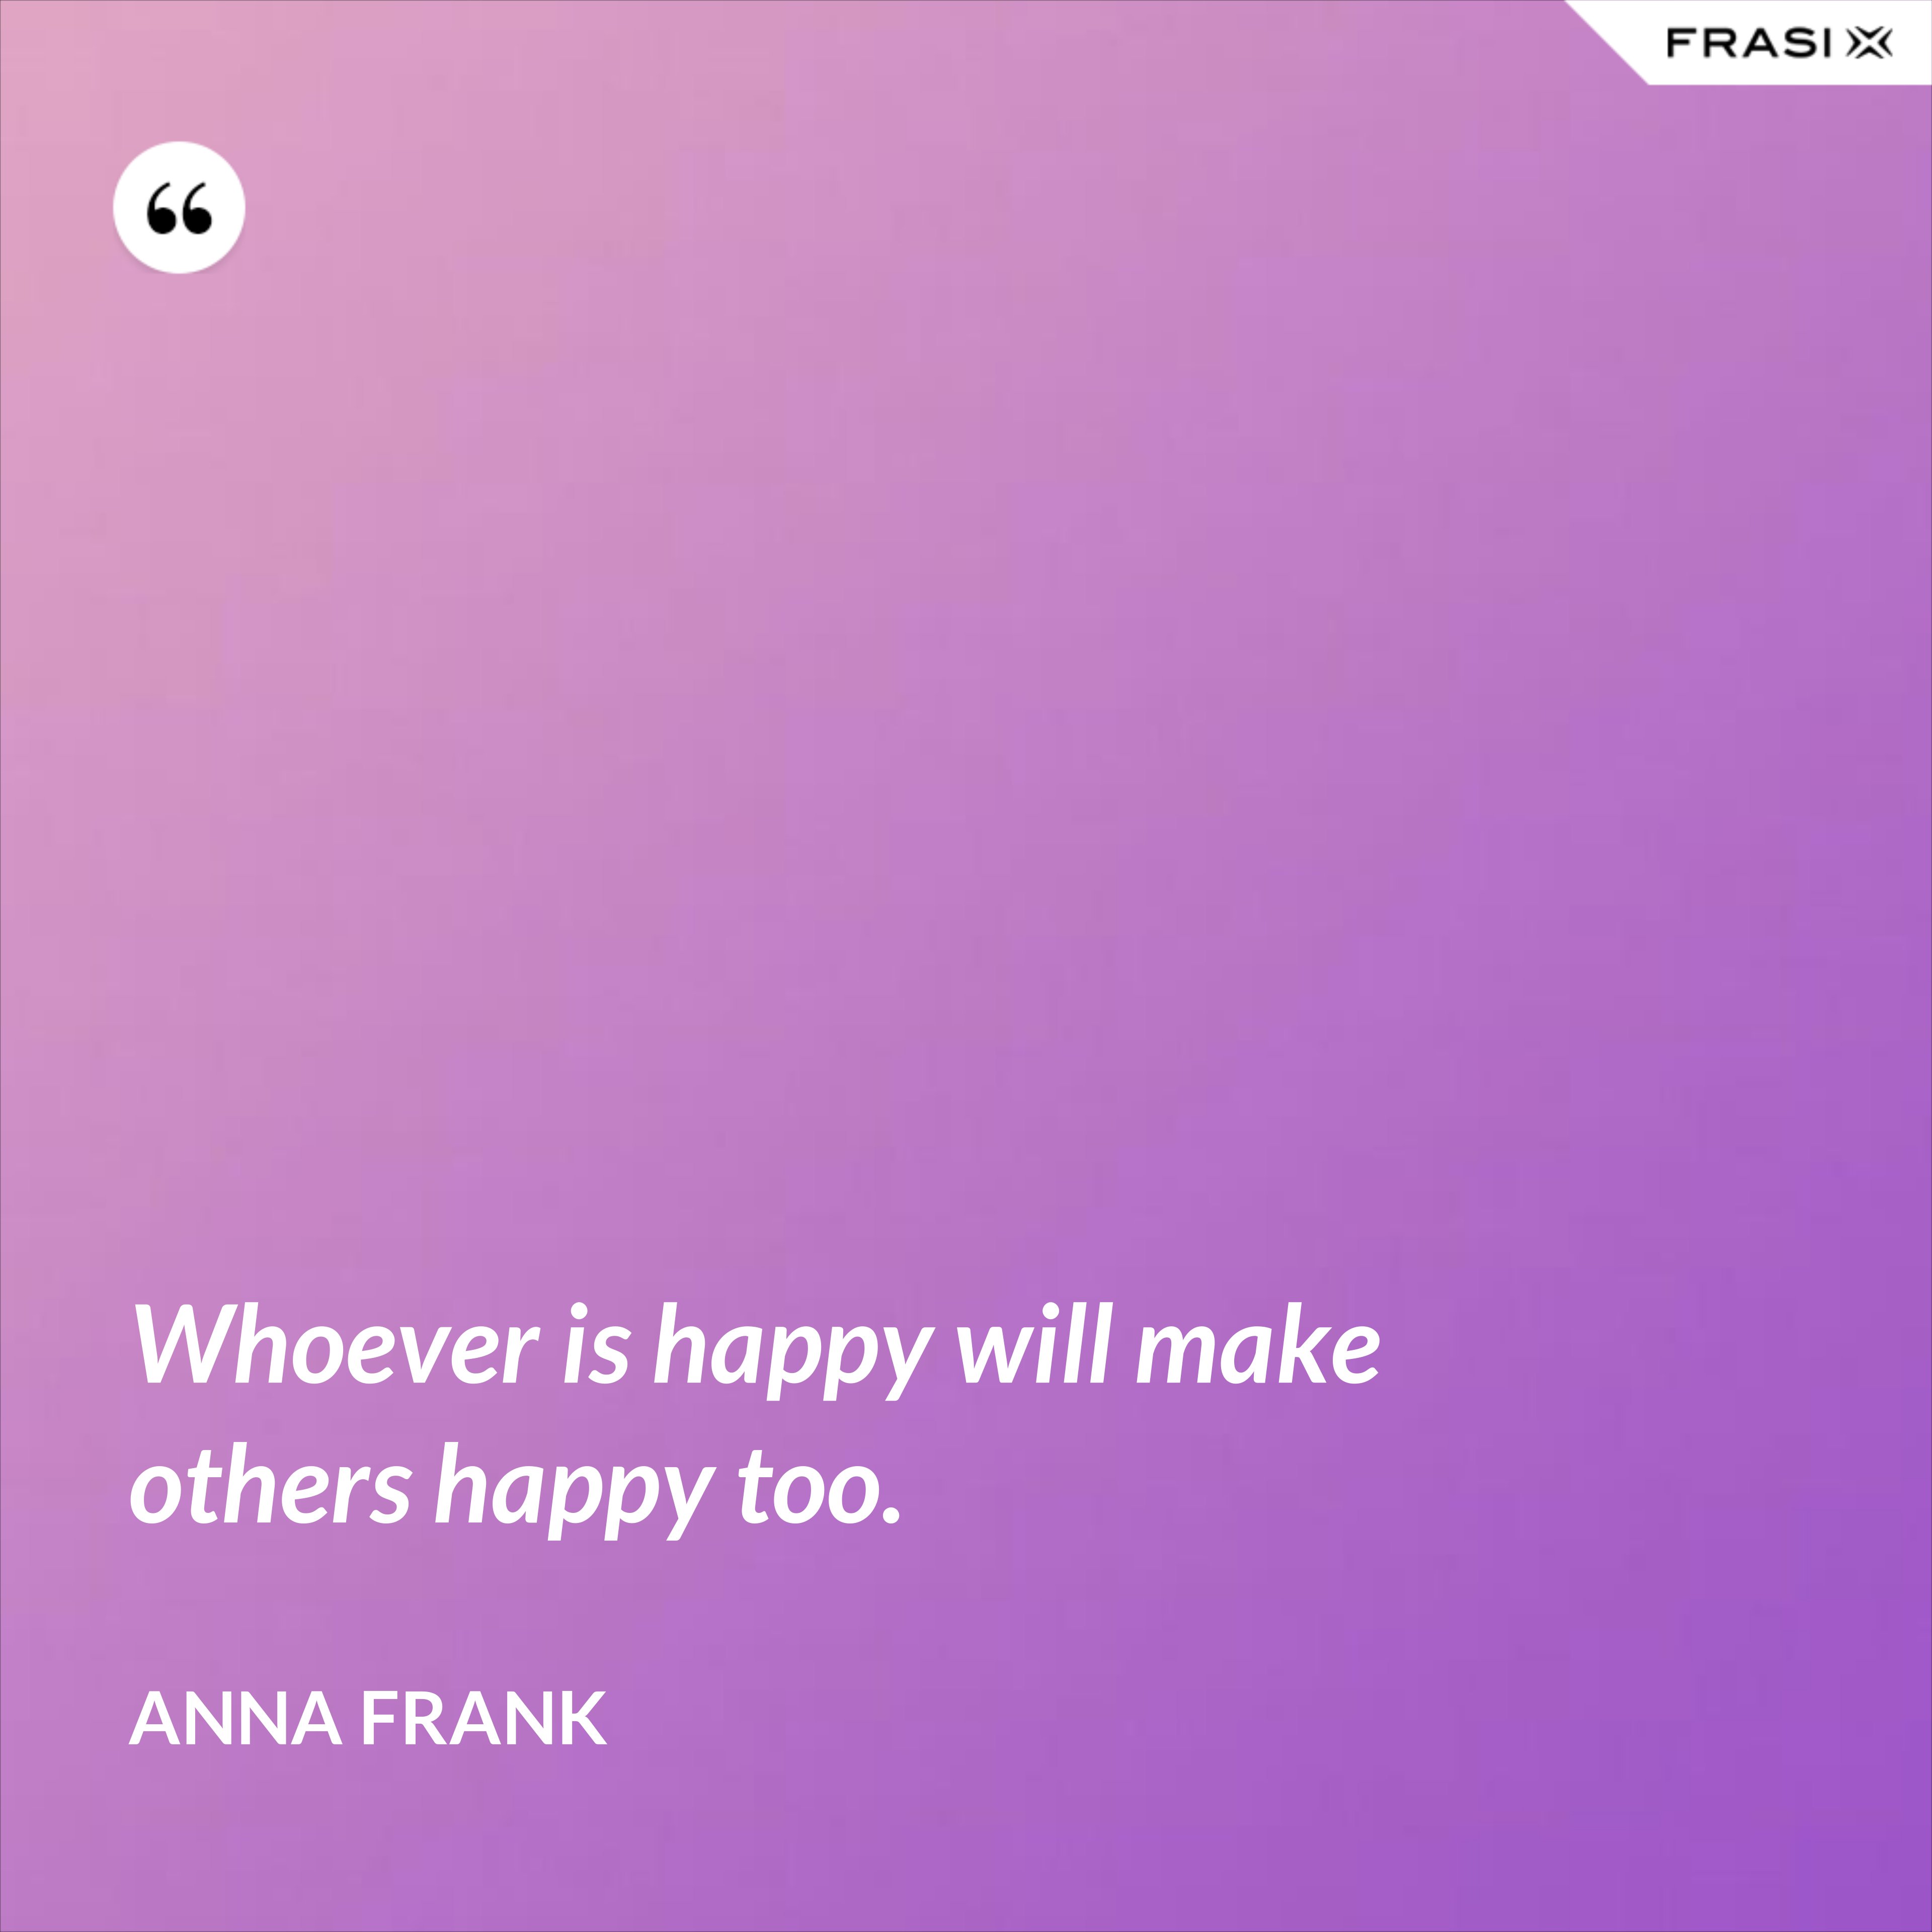 Whoever is happy will make others happy too. - Anna Frank